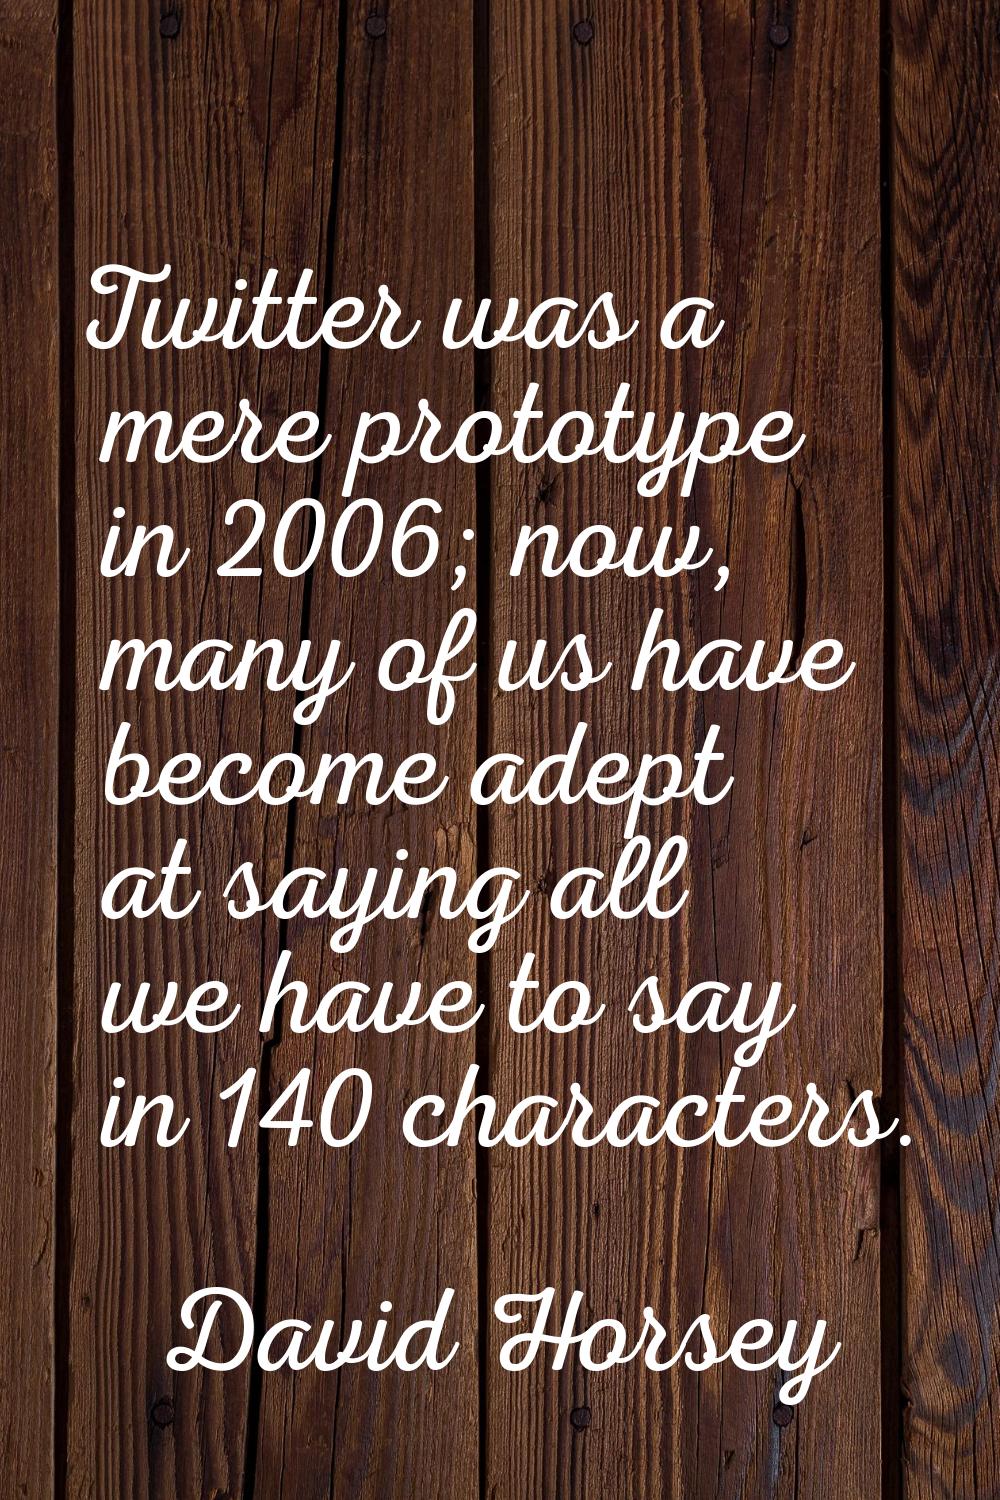 Twitter was a mere prototype in 2006; now, many of us have become adept at saying all we have to sa